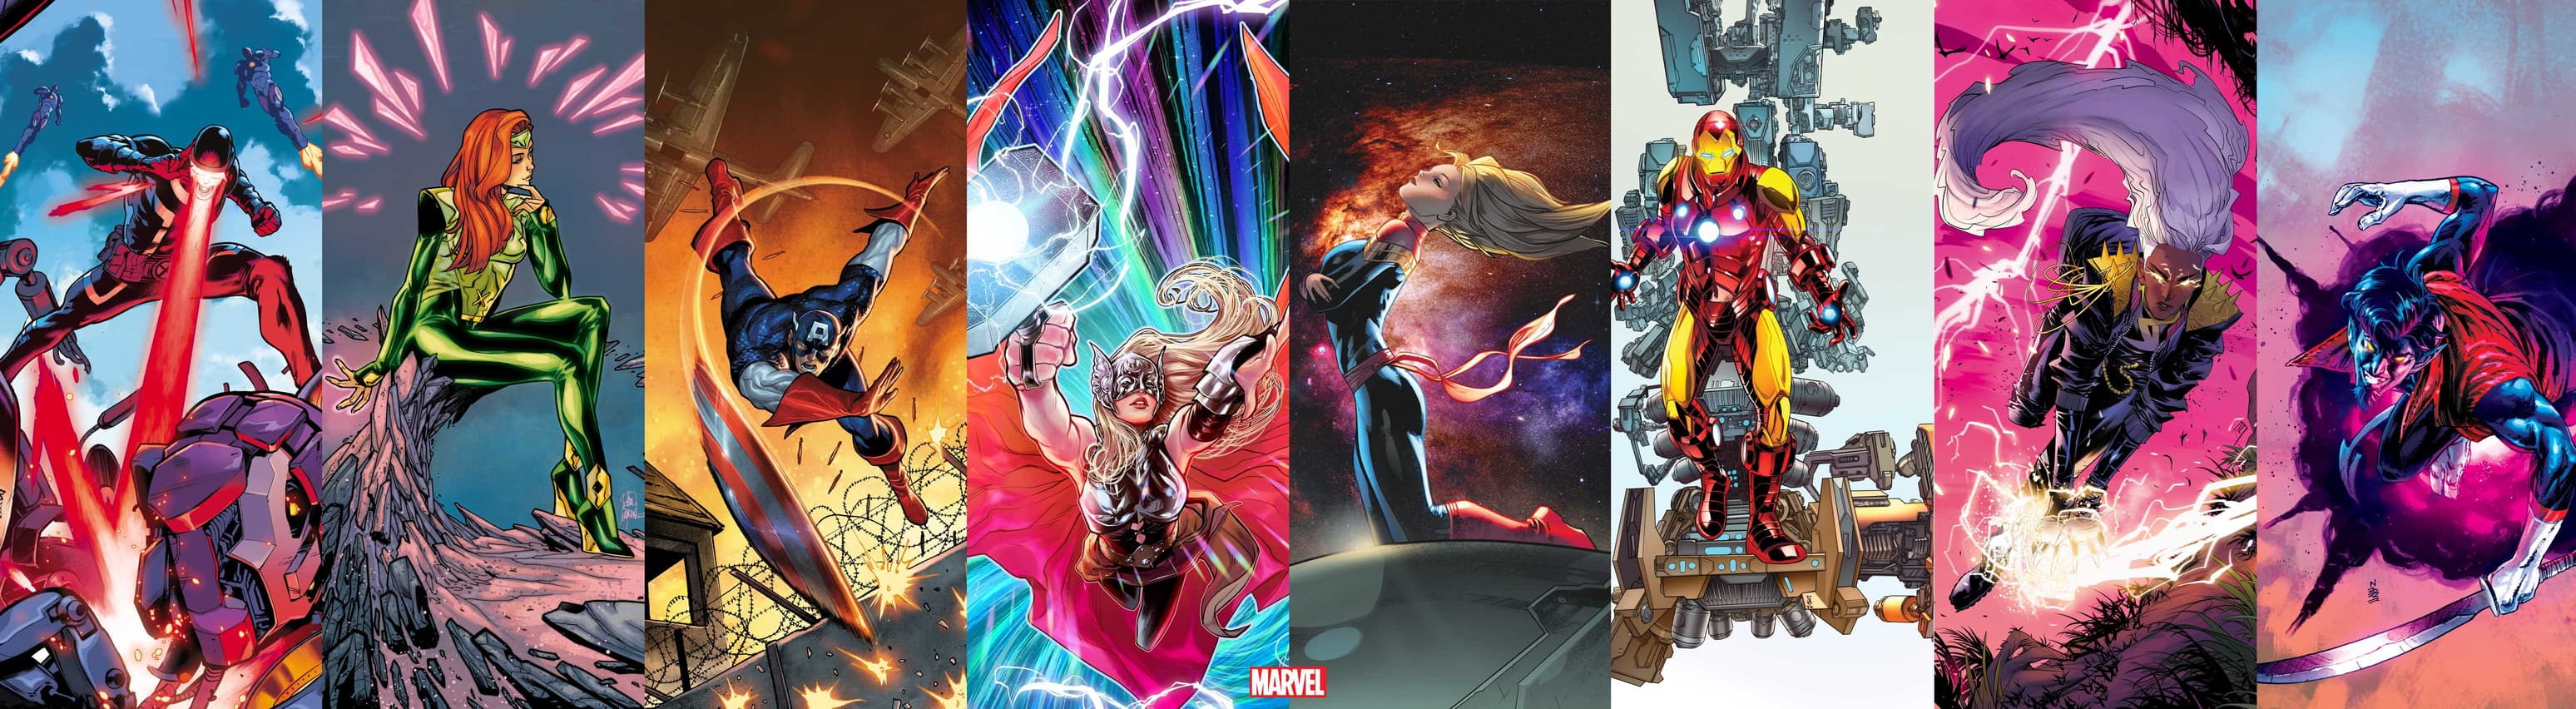 Stormbreakers Variant Covers: Marvel '23